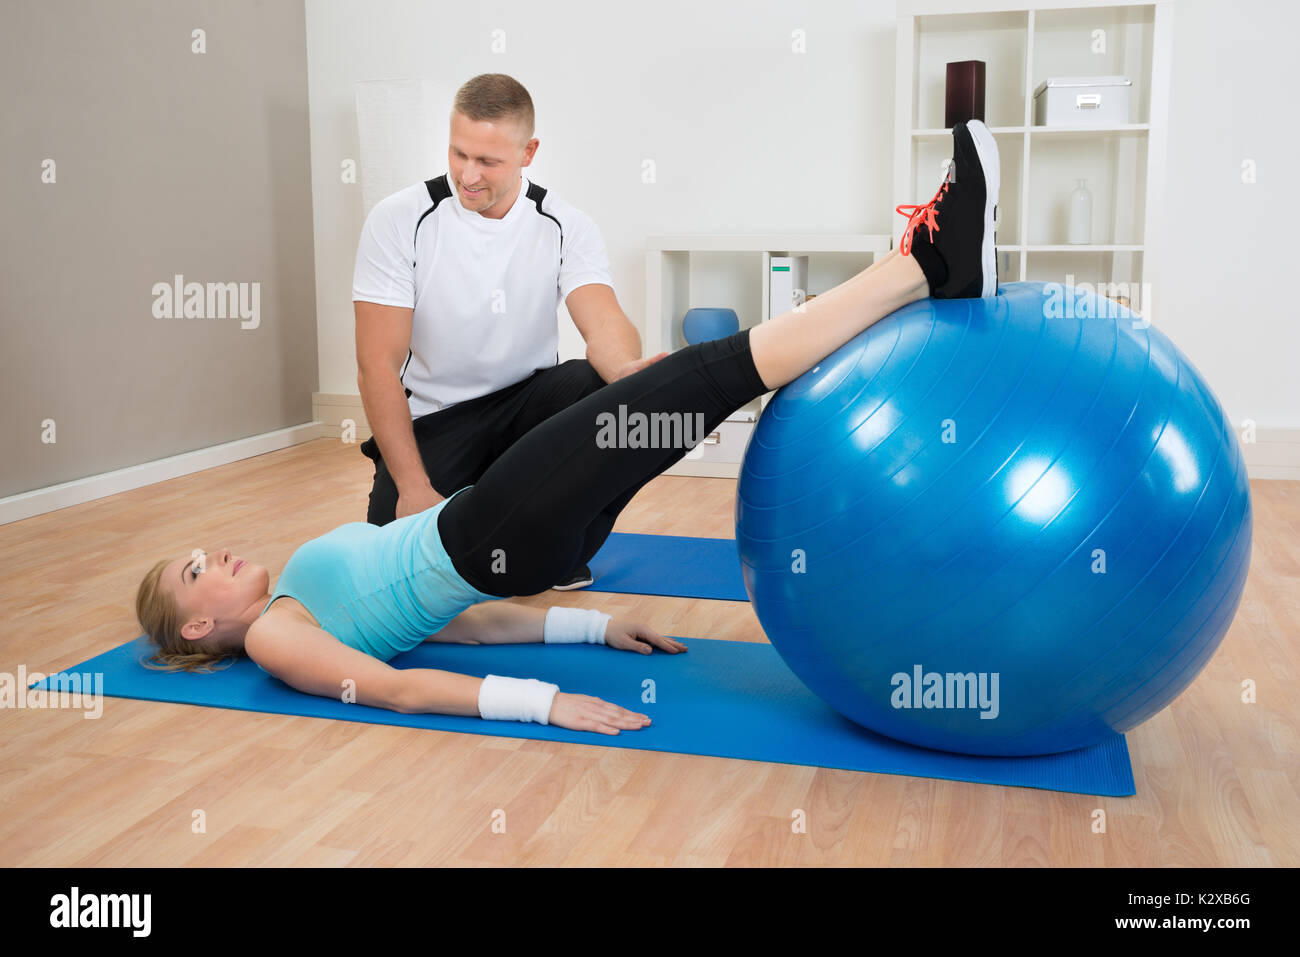 Male Instructor Looking At Woman Exerting With Pilate Ball Stock Photo